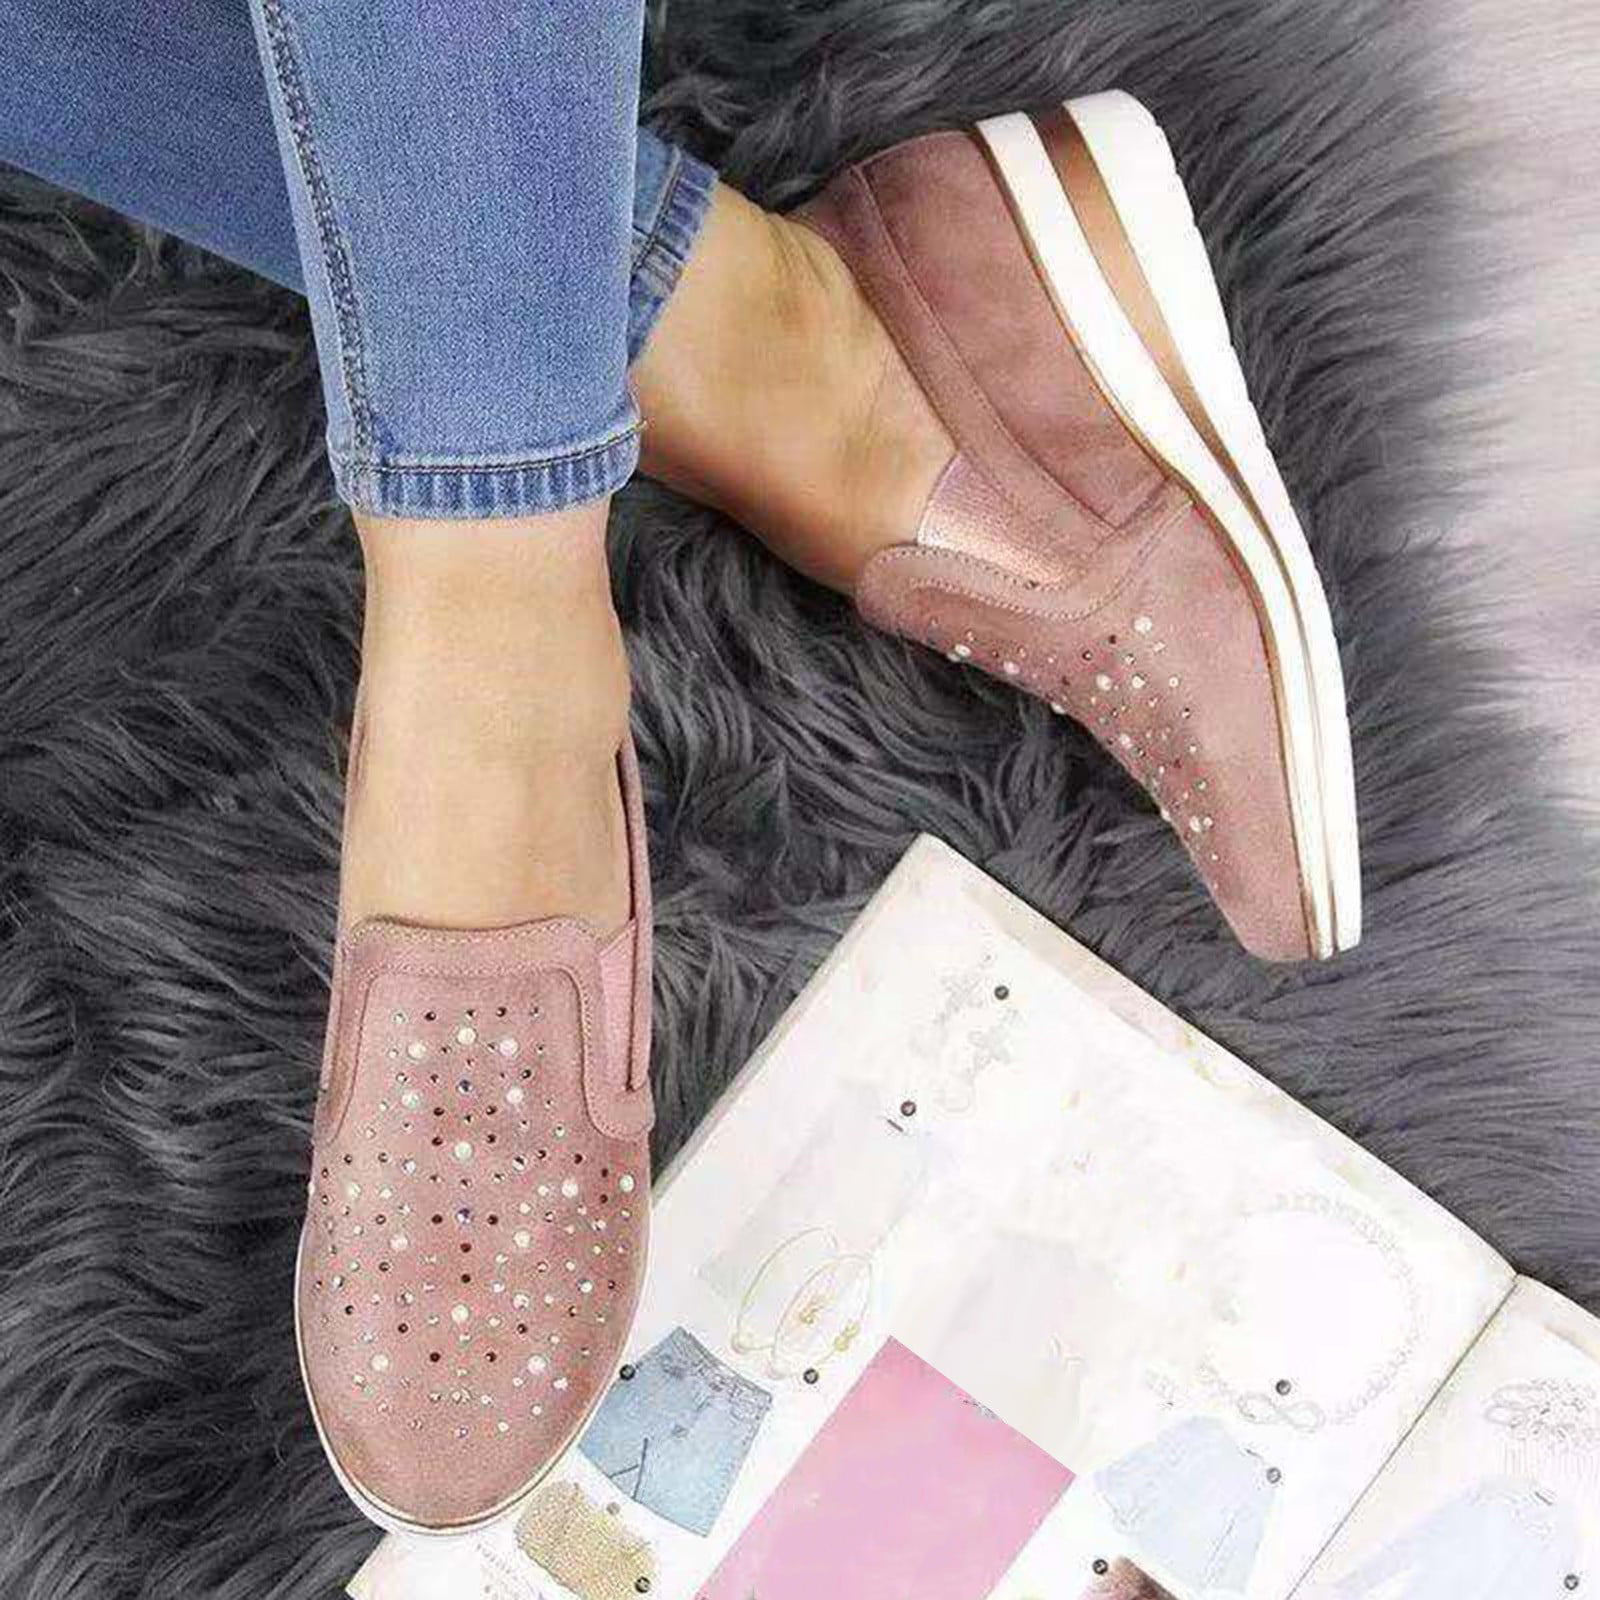 Feversole Women's Fashion Dress Sneakers Party Bling Casual Flats Embellished Shoes Rose Gold Plimsolls Glitter Lace Us6.5/Eu37